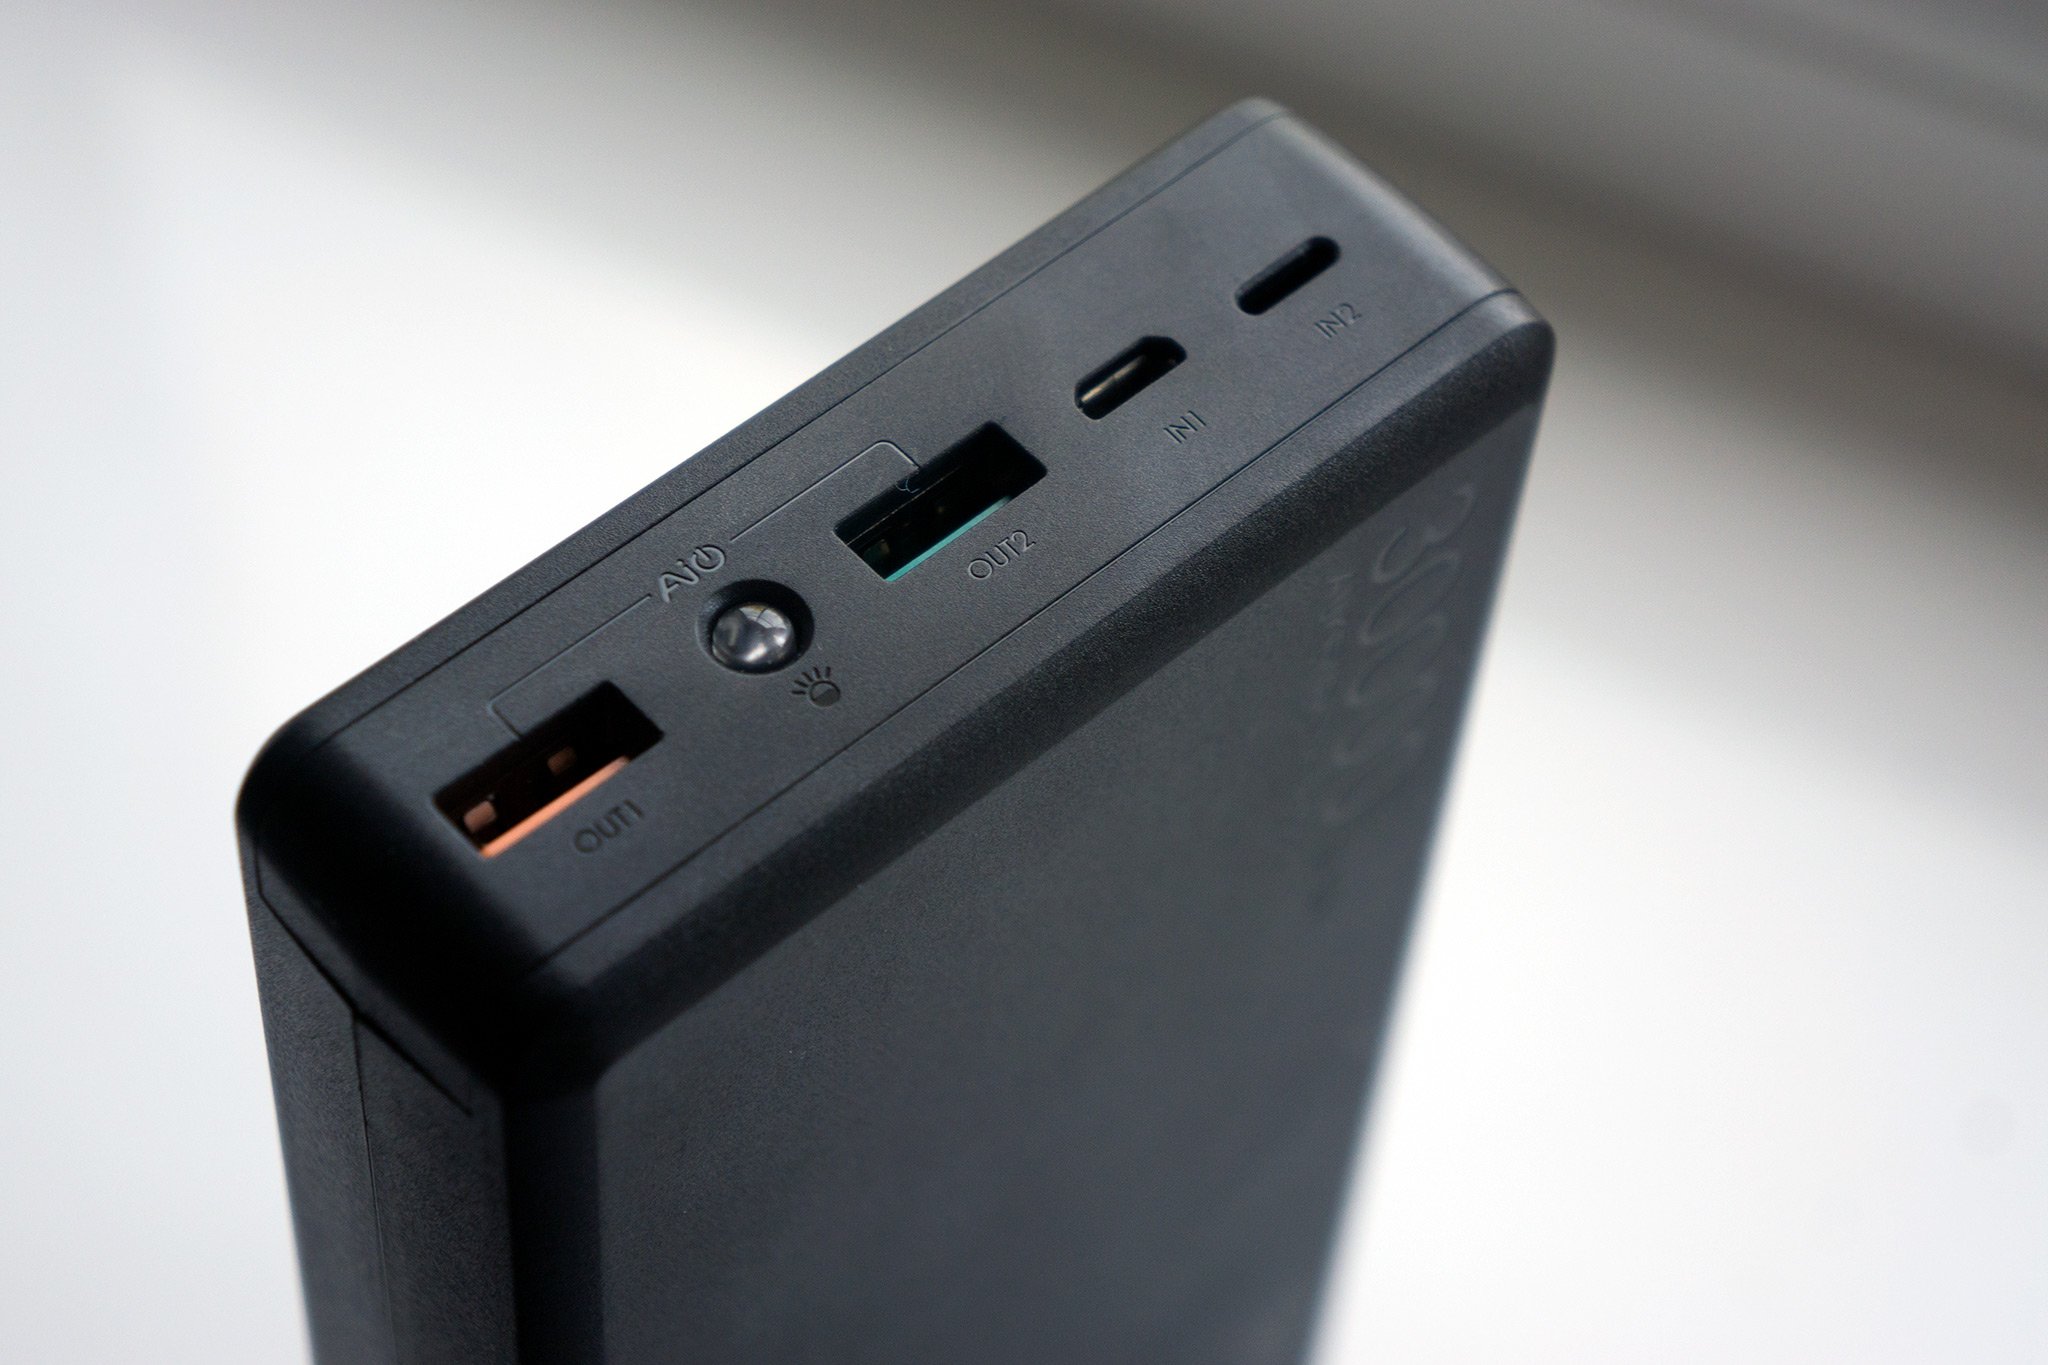 AUKEY's 30000mAh battery pack contains all the power you could possibly